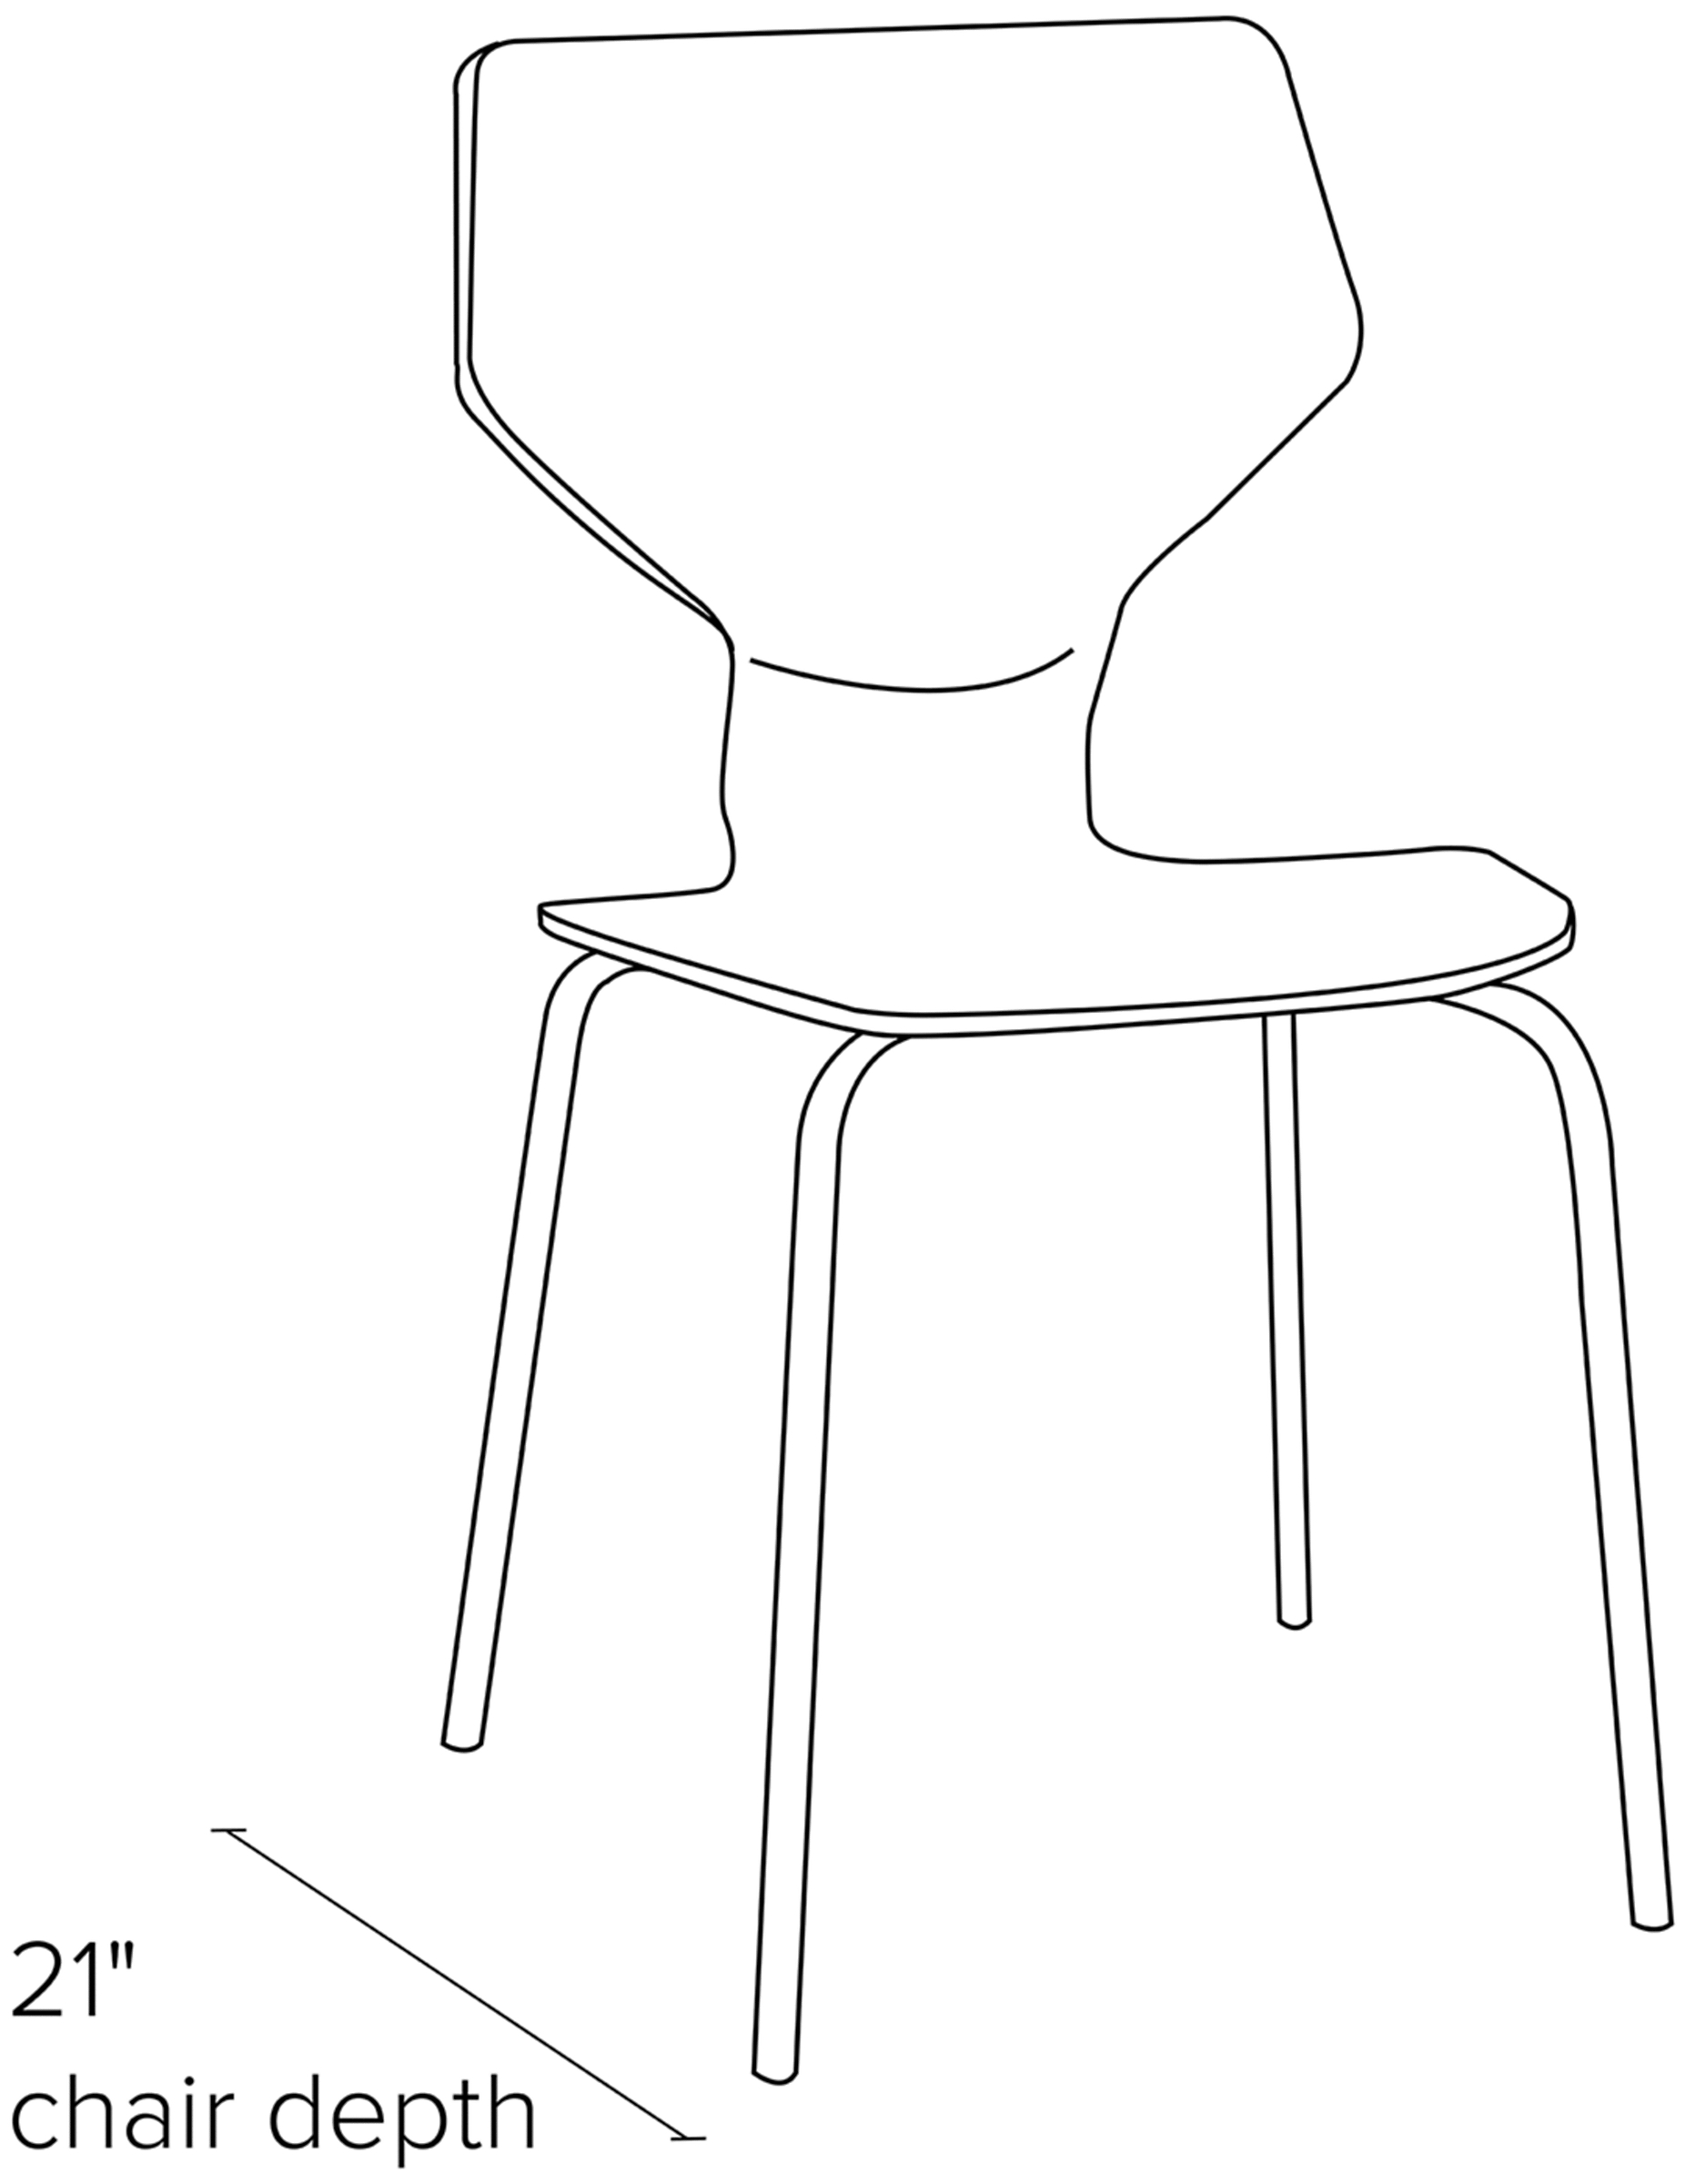 Side view dimension illustration of Pike side chair.